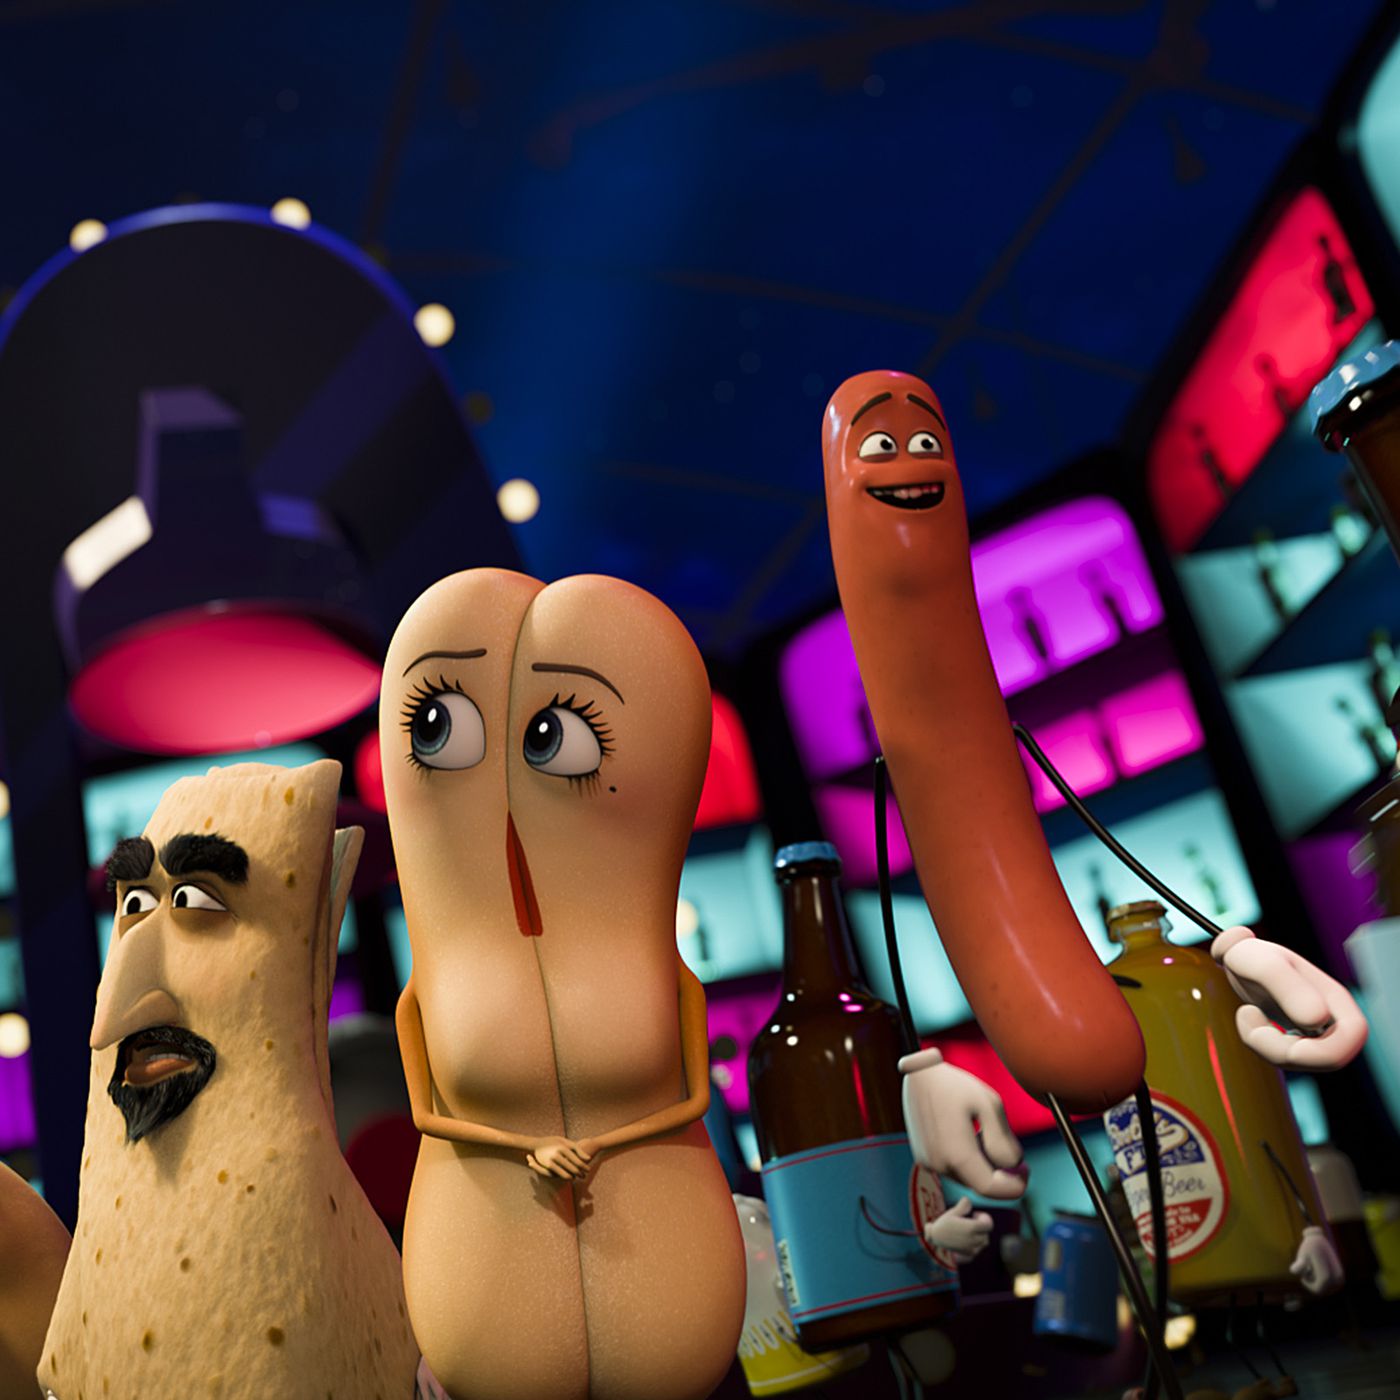 archie yeomans recommends sausage party movie orgy scene pic